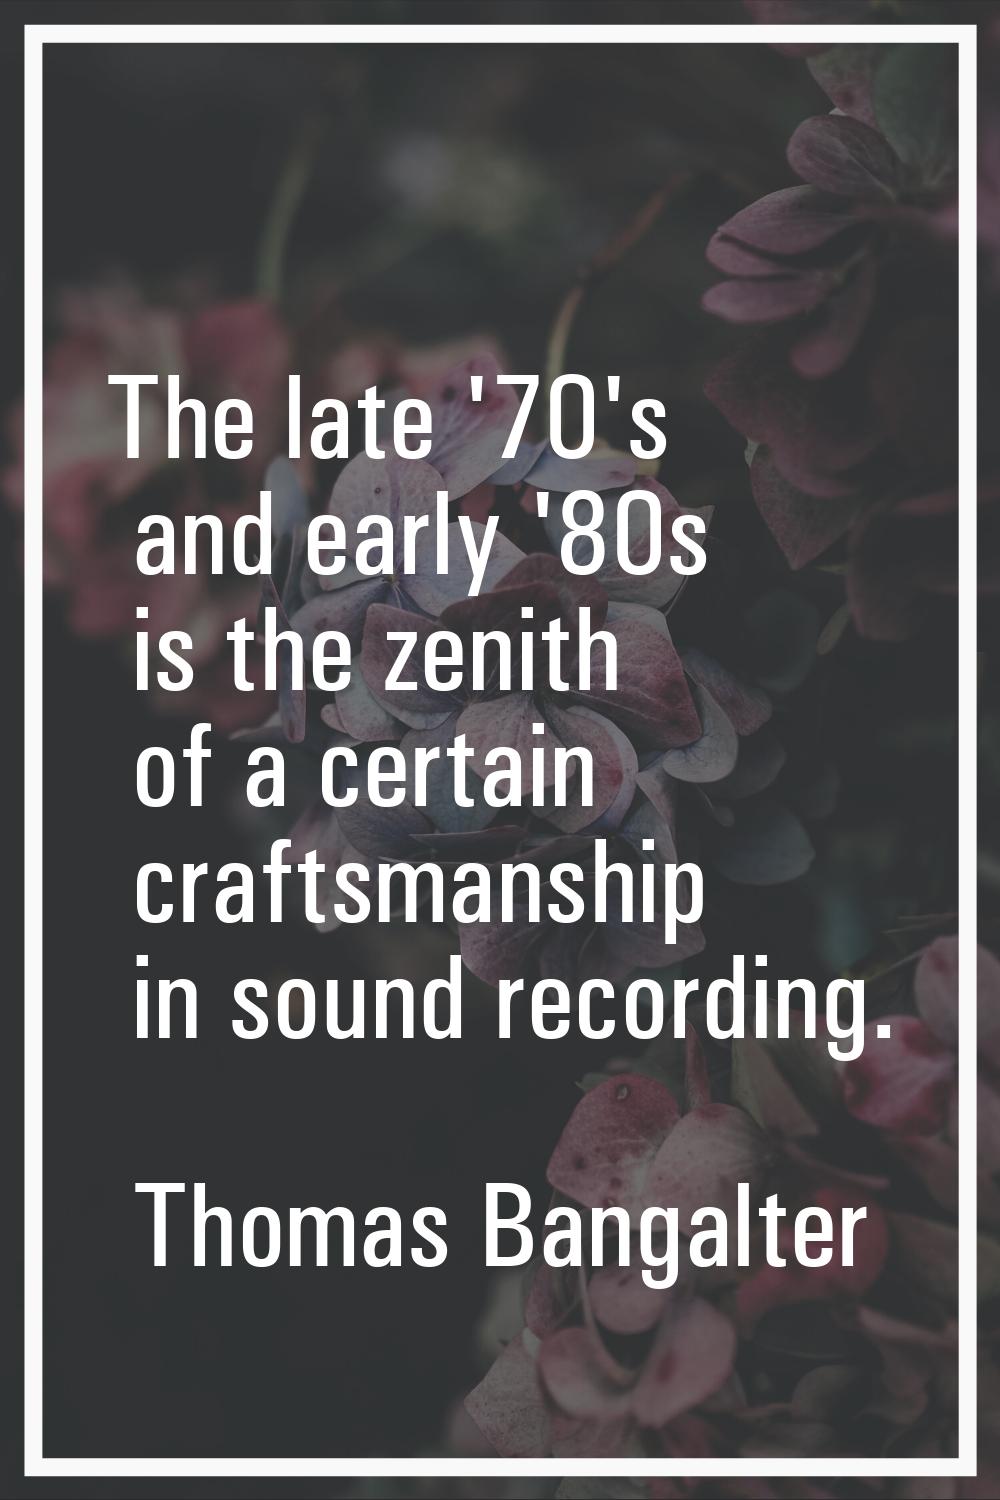 The late '70's and early '80s is the zenith of a certain craftsmanship in sound recording.